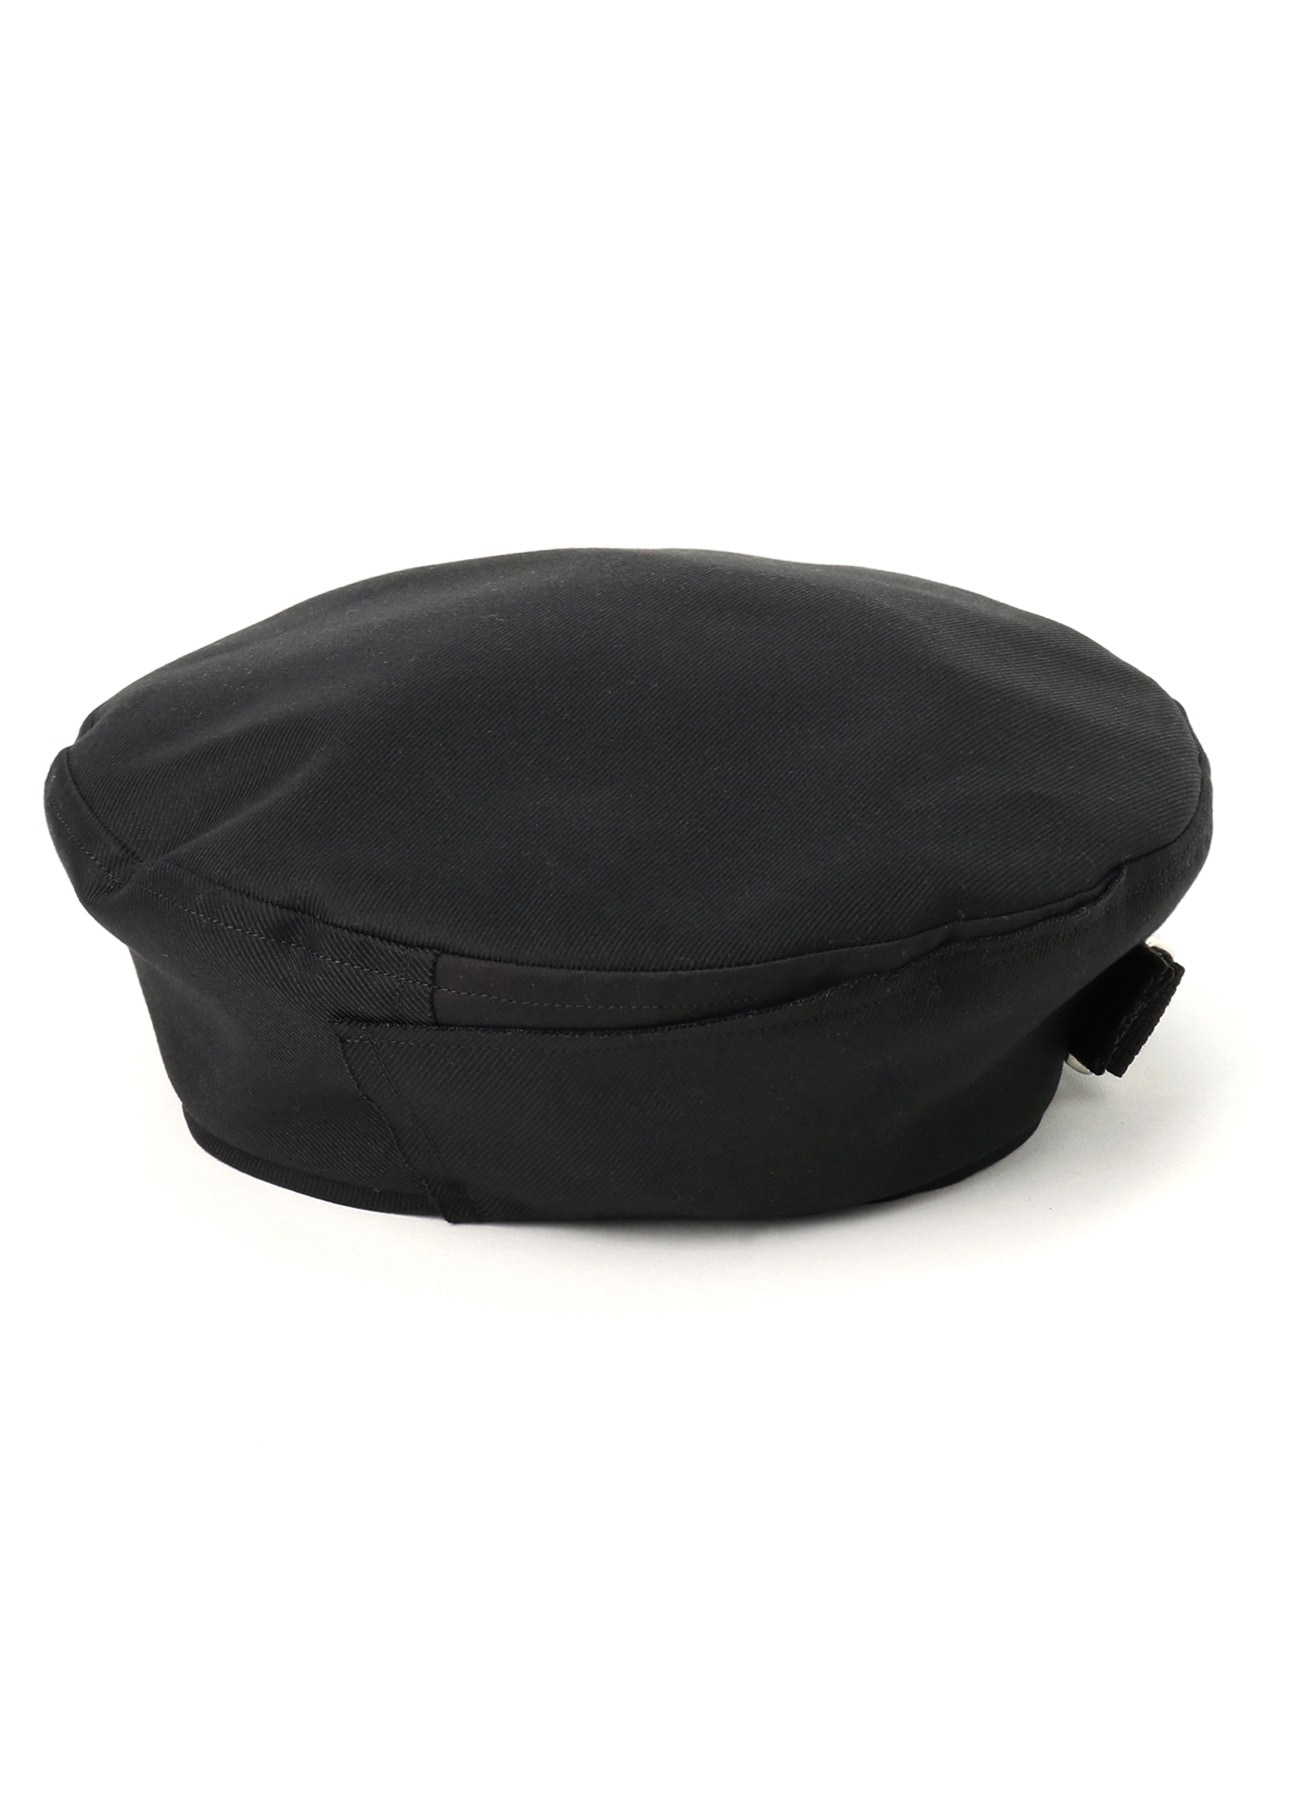 ishica FRENCH TWILL FREEWAY BERET HAT(FREE SIZE BLACK): Ground Y 